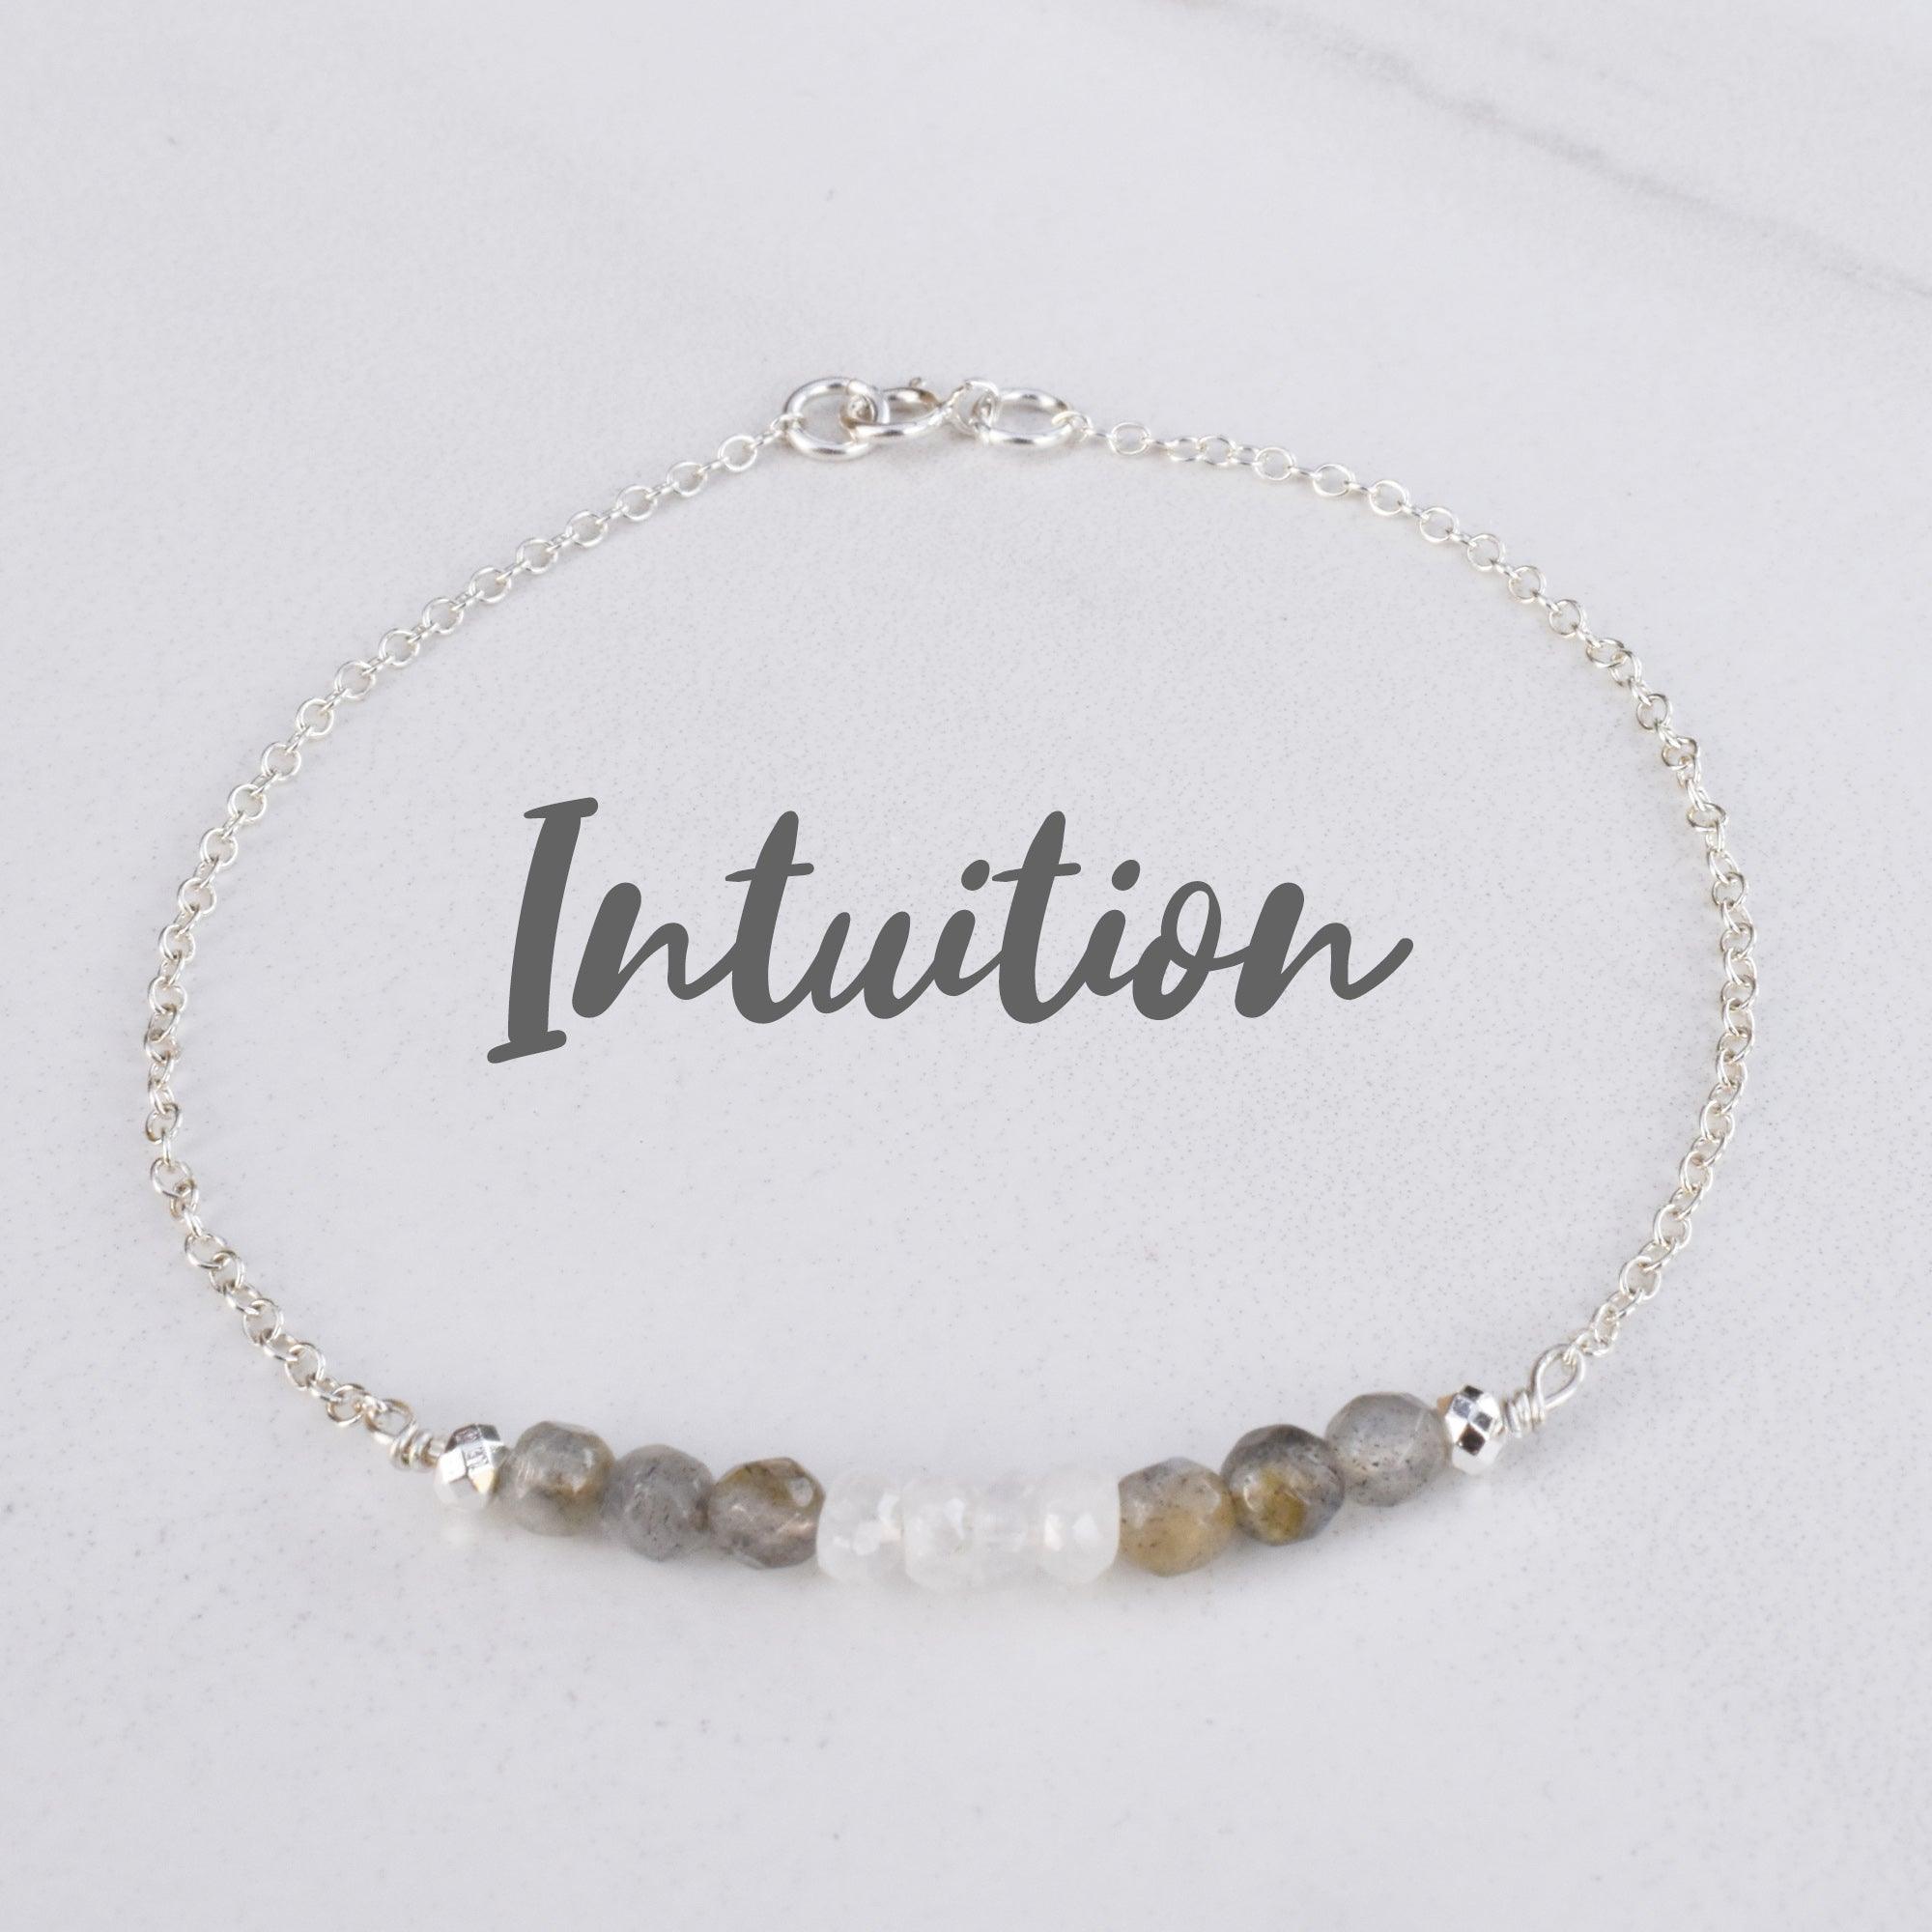 Dainty labradorite and  moonstone healing bracelet to help you develop your intuition and trust your inner gifts. 